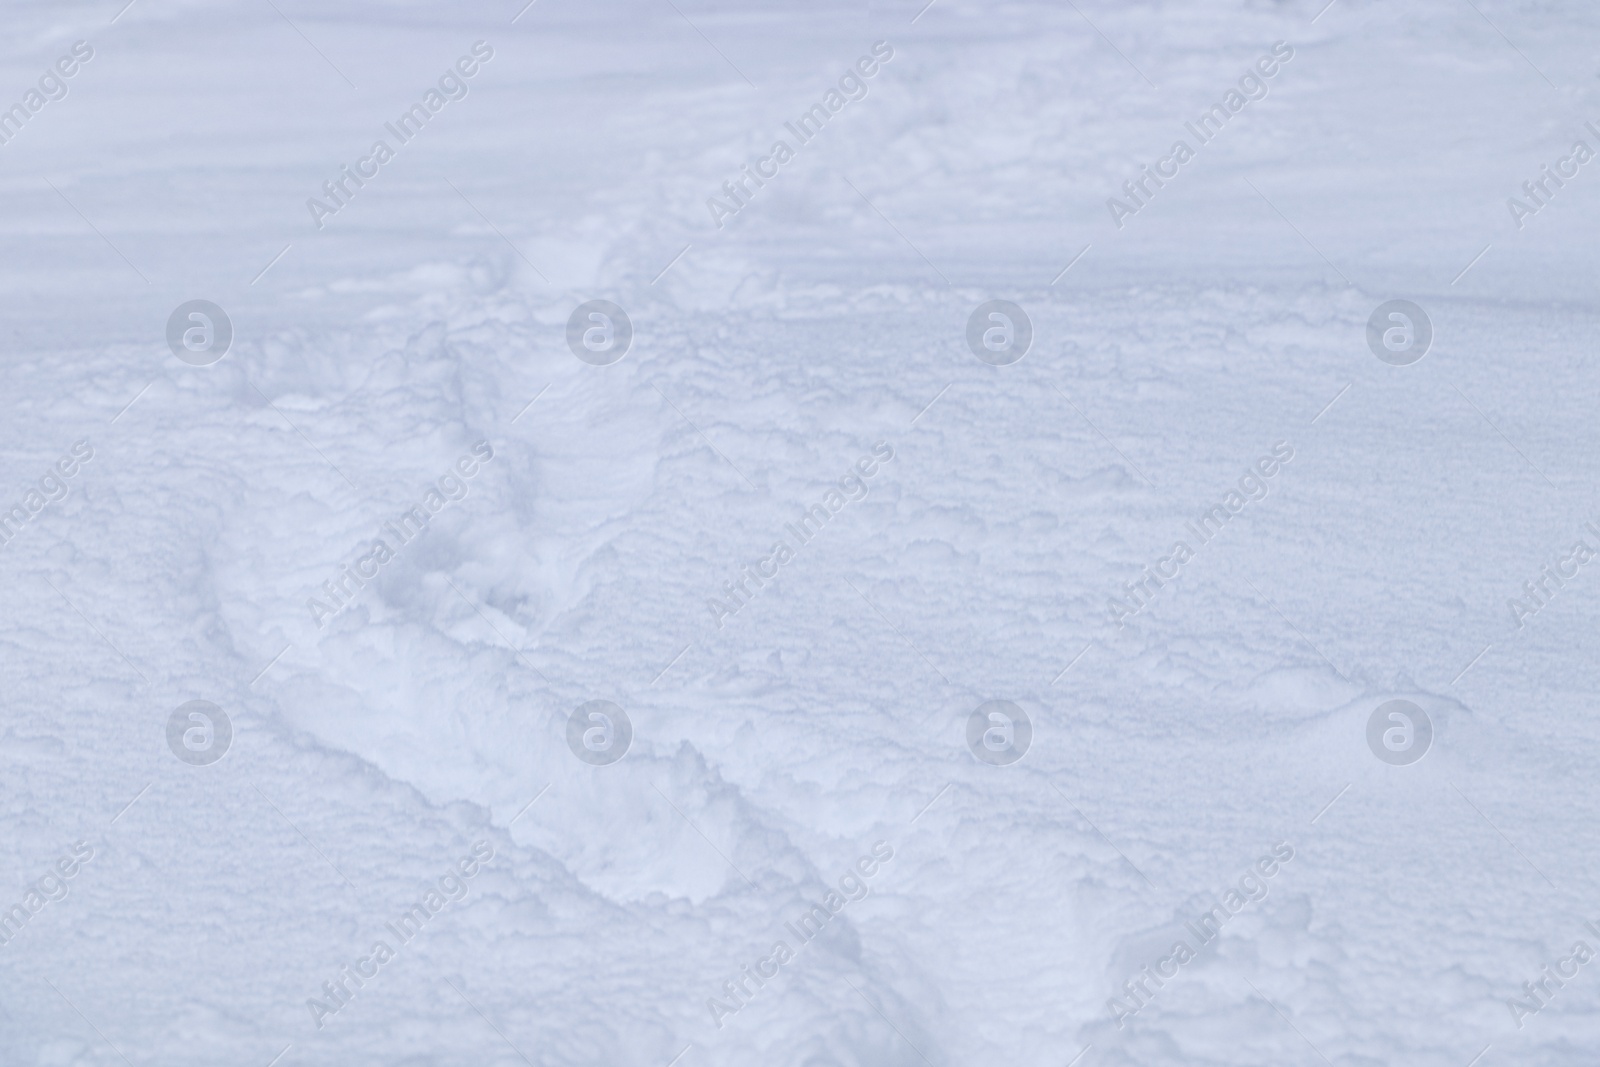 Photo of Footprints on beautiful shiny snow as background, closeup view